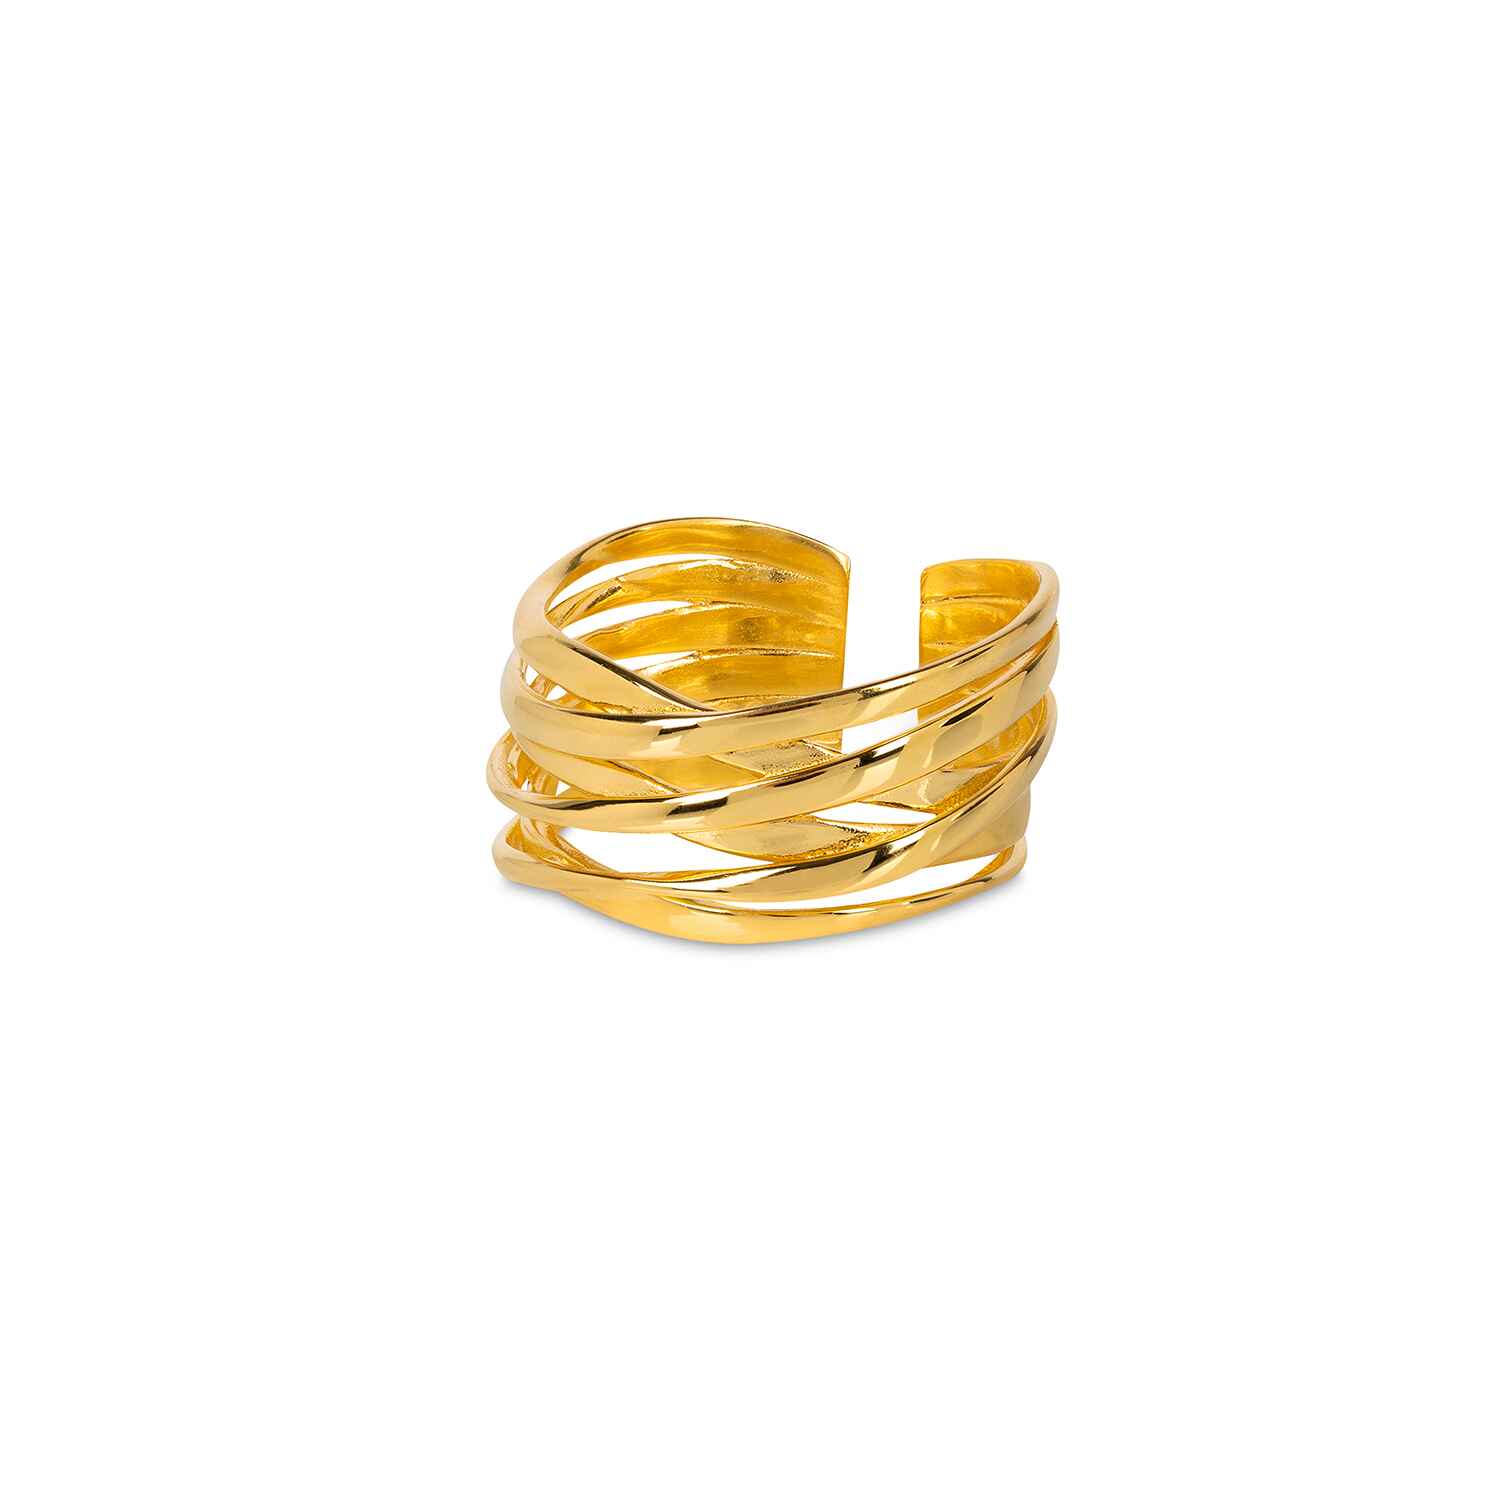 Organic in shape, the Genesis Gold Stacking Ring gives the illusion of six stacked rings, with the modern addition of negative space. Fully size adjustable, this bold and comfortable design is made with recycled gold.